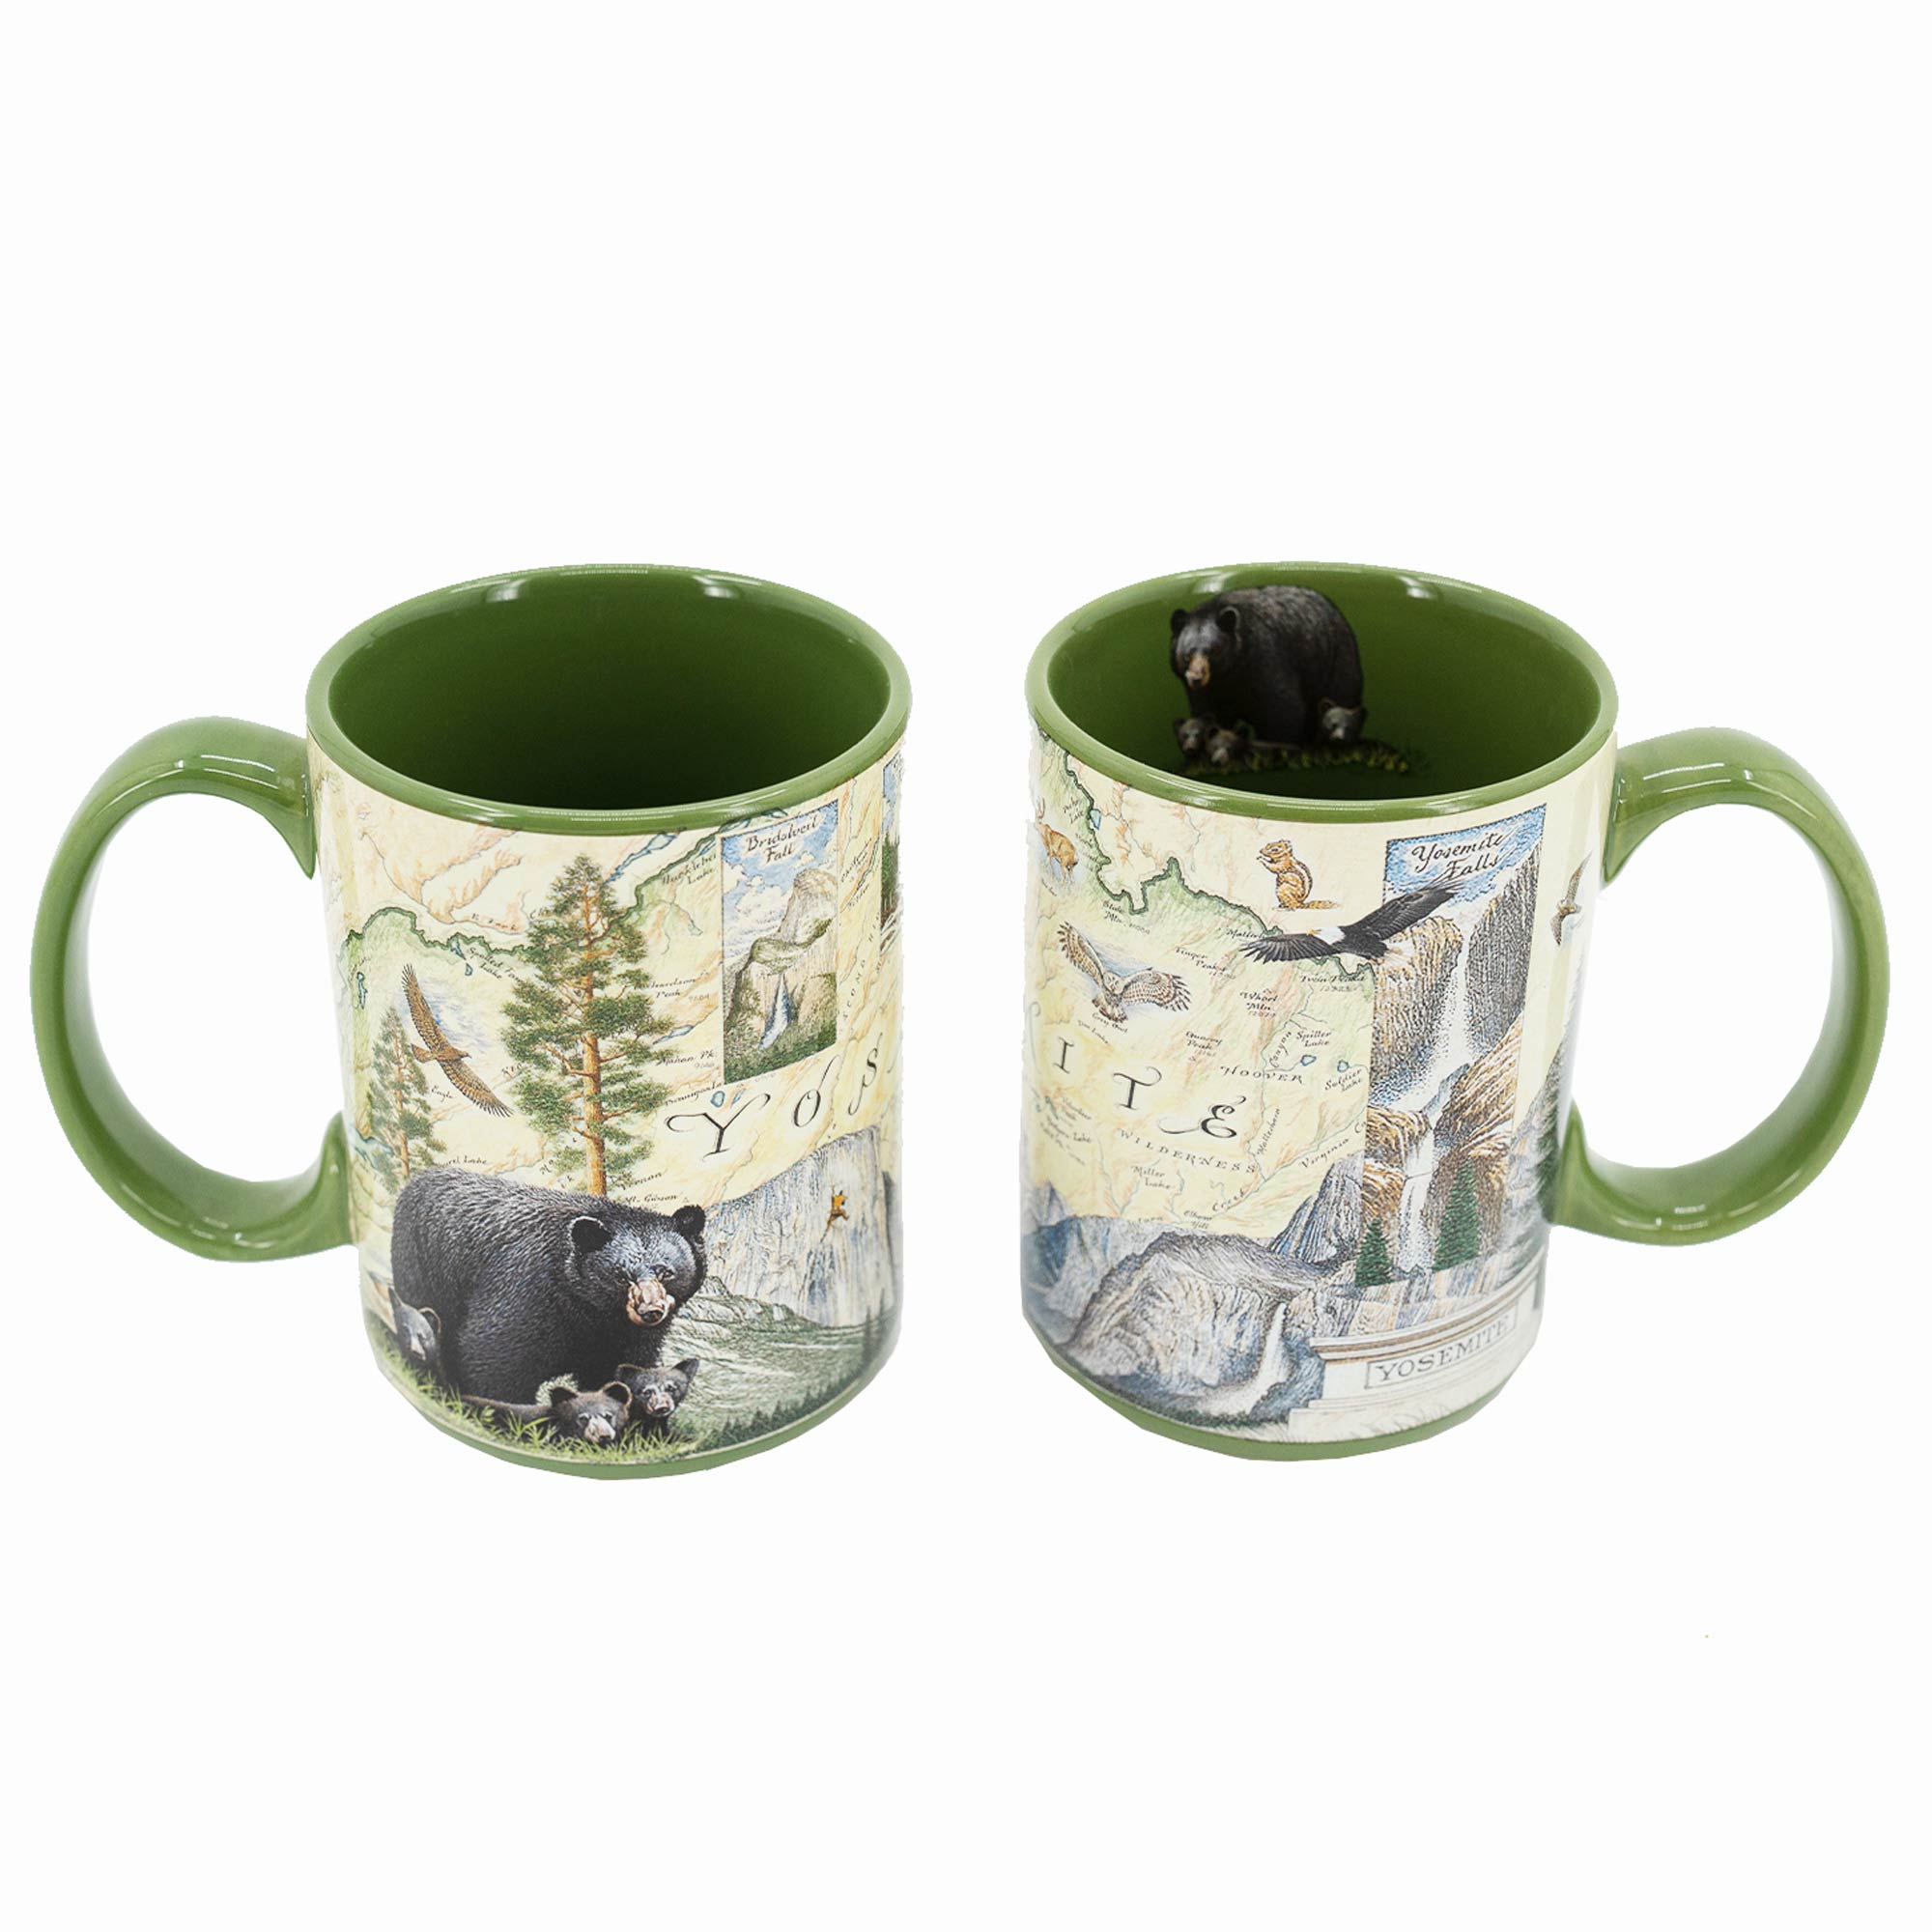 Two green 16 oz Yosemite National Park Ceramic coffee Mug. The map features illustrations of places such as Vernall Falls, El Capitan, and Half Dome. Flora and fauna include black bear, mule deer, Indian paintbrush, grey owl, and coyote. Other illustrations include John Muir, mountain climbing, hiking, and Ansel Adams. 